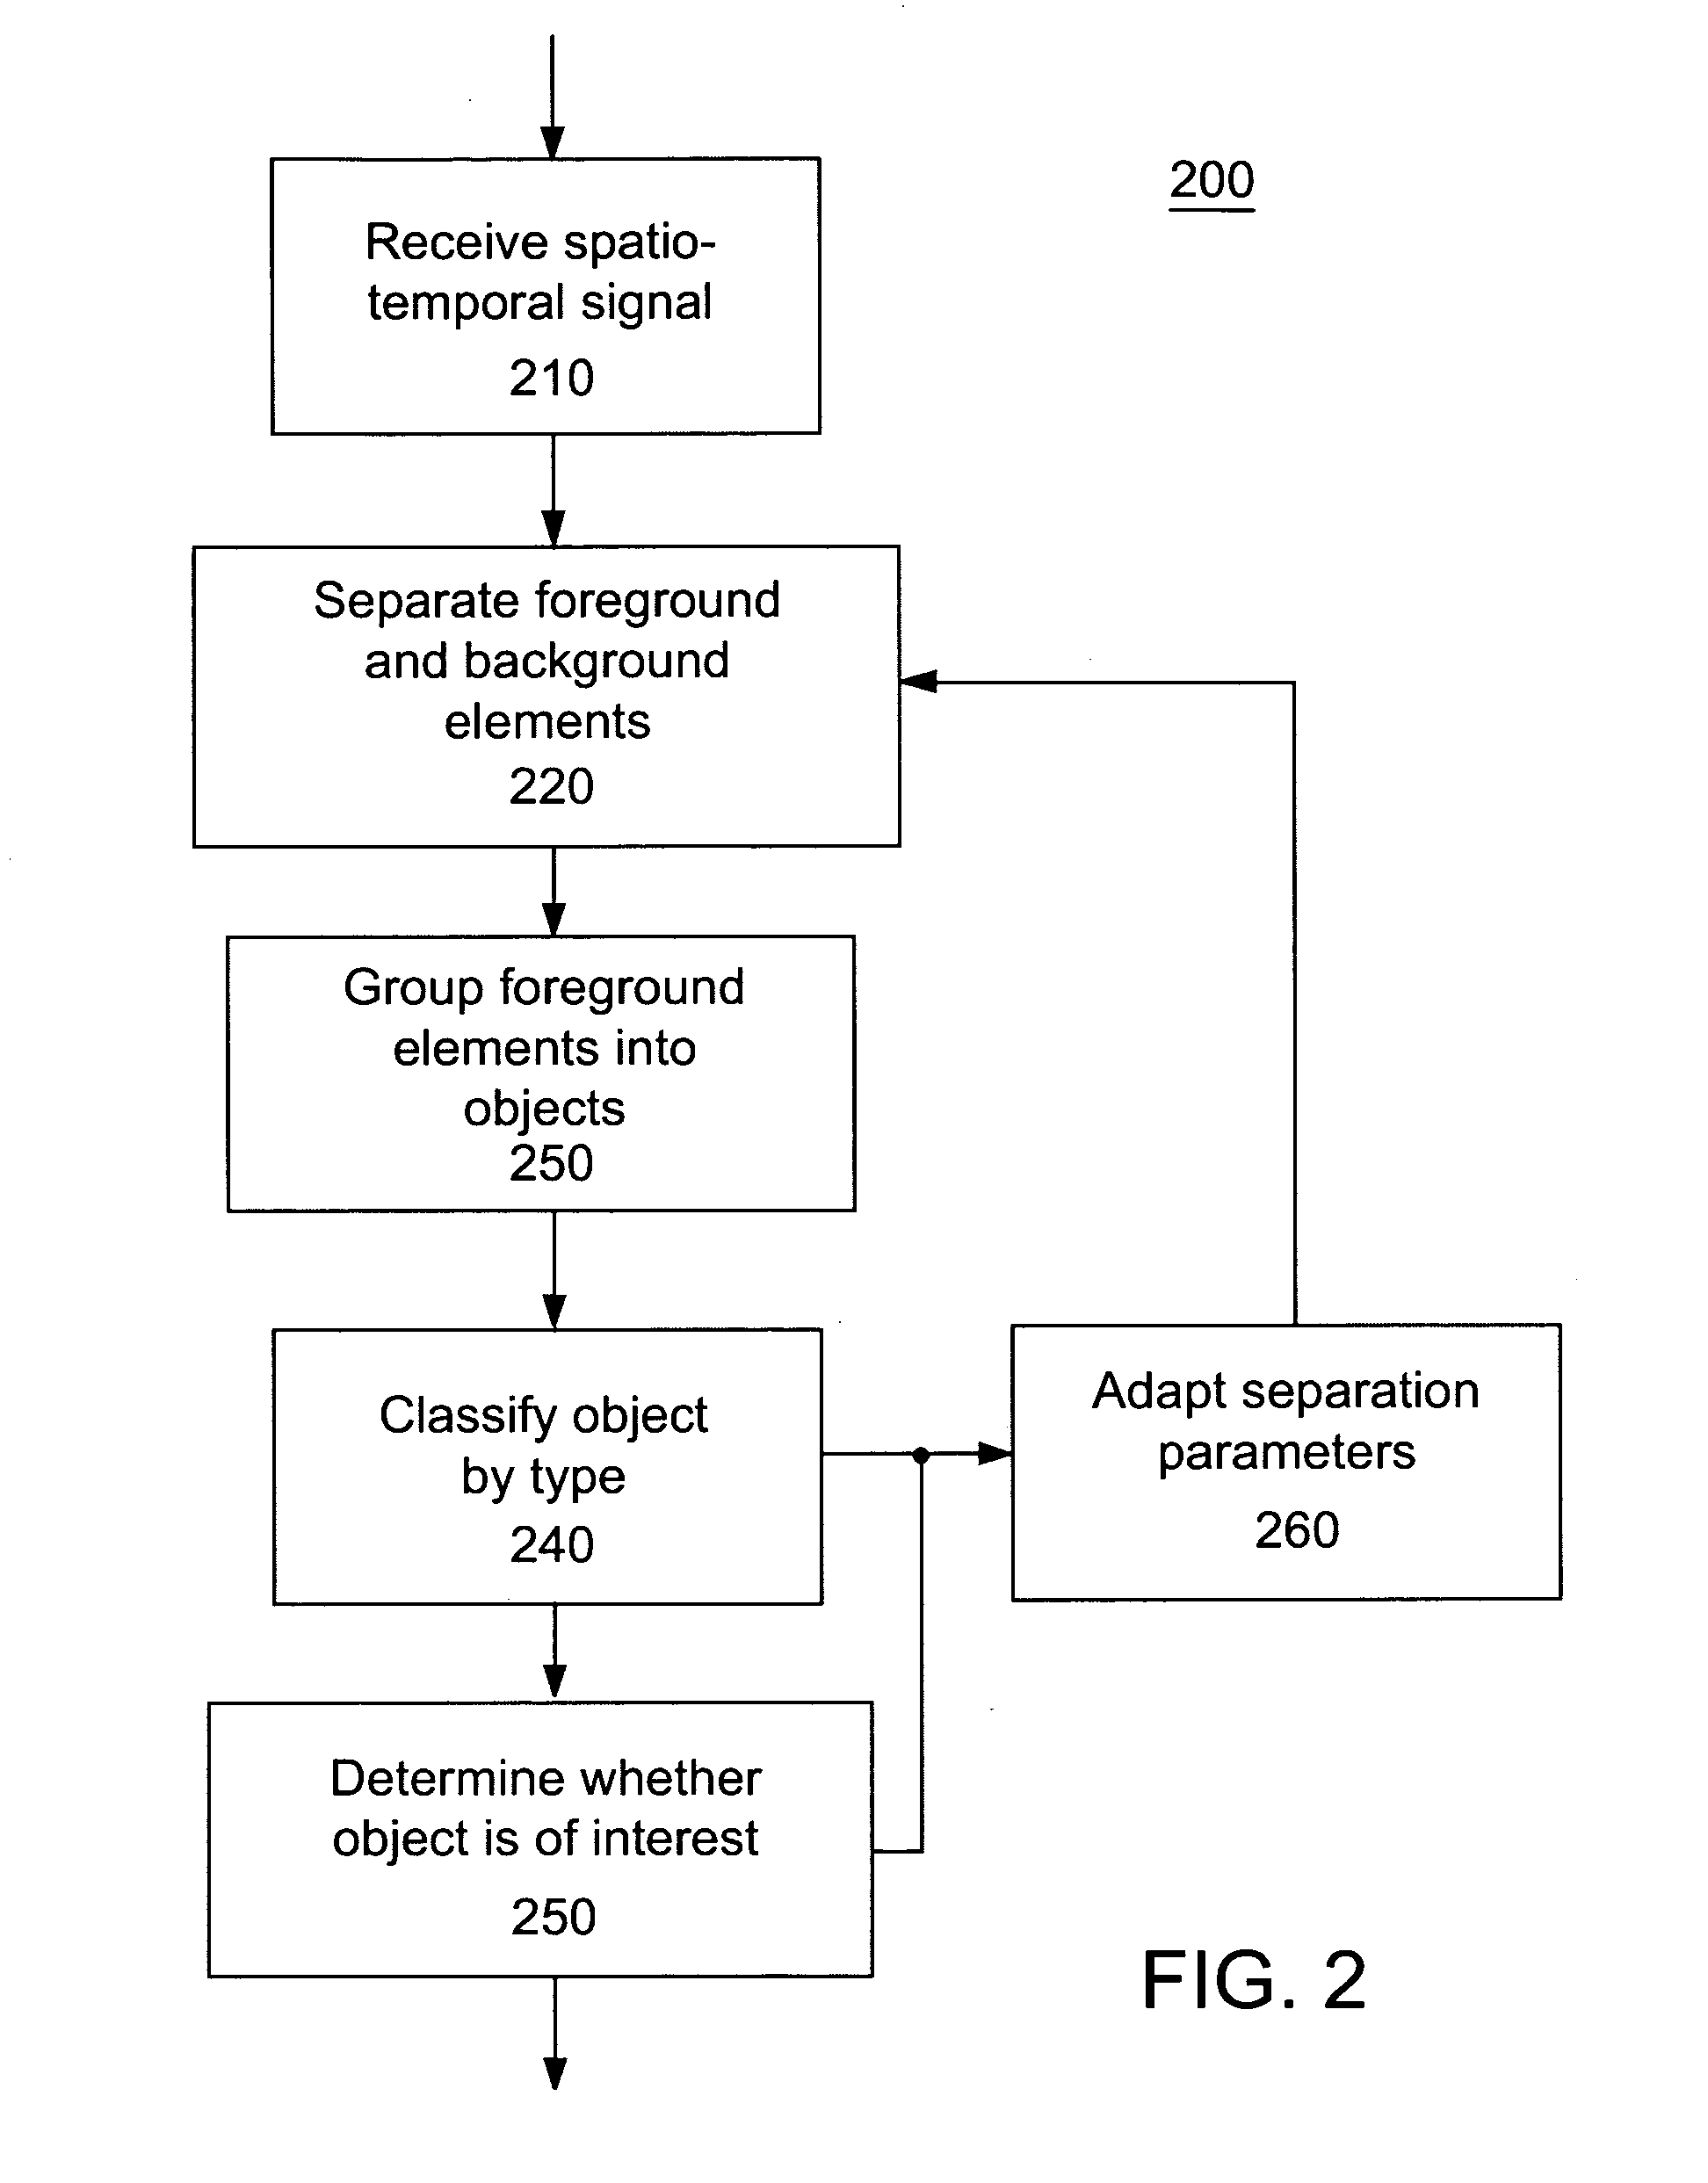 Methods and systems for detecting objects of interest in spatio-temporal signals